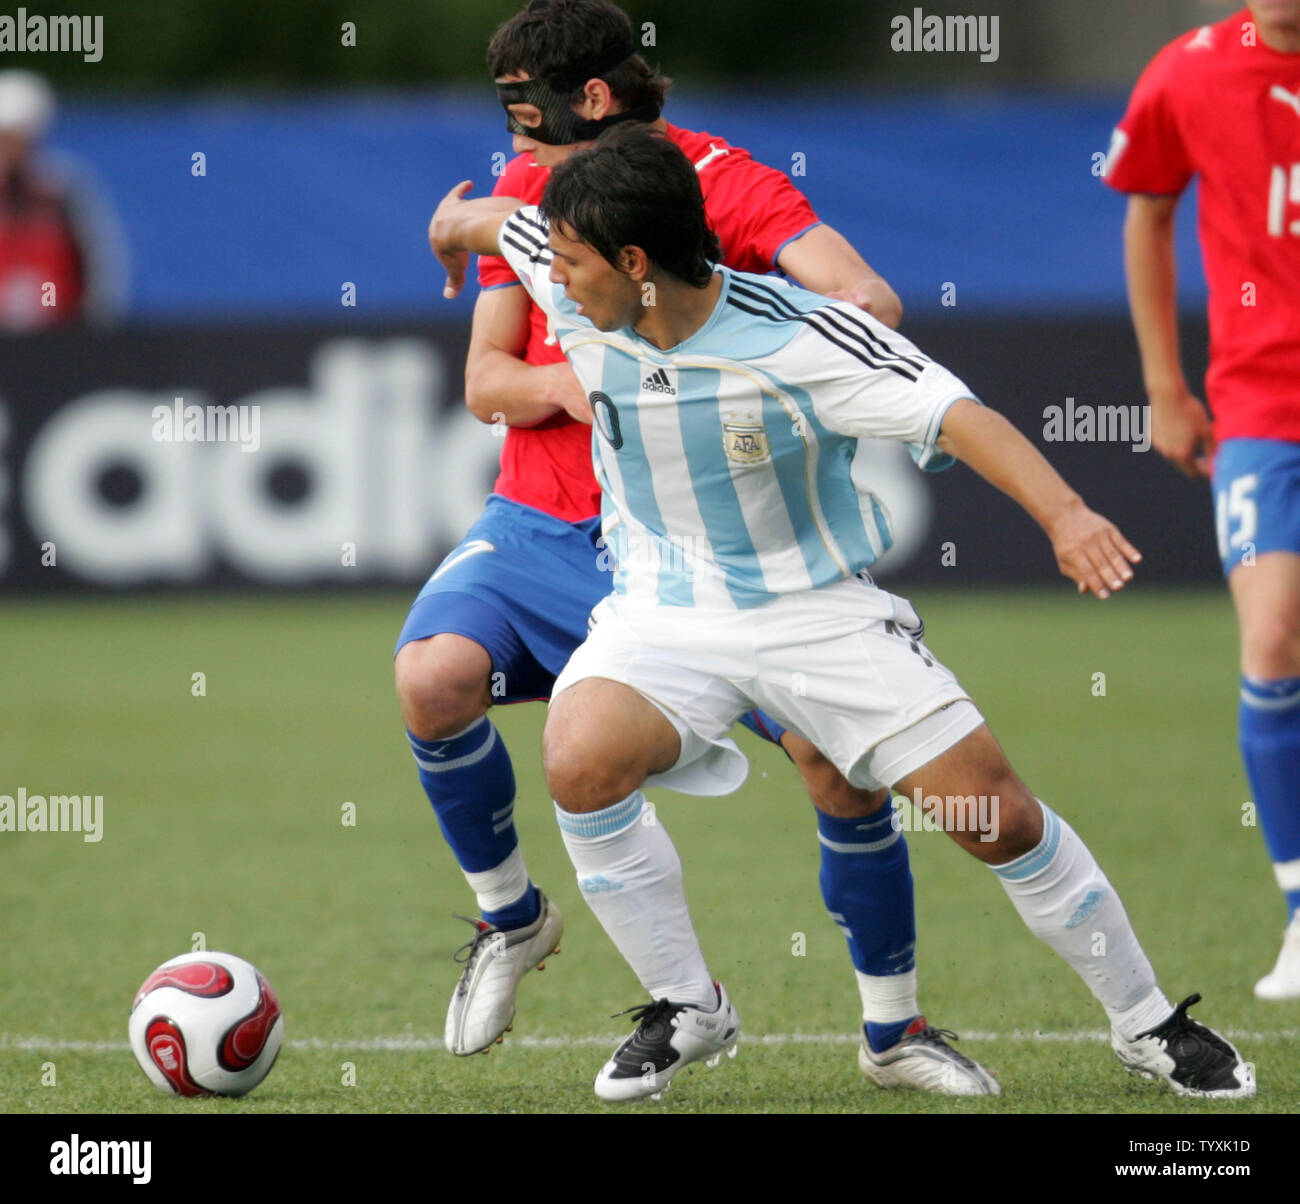 Argentina's forward Sergio Aguero (R) pushes off against Czech Republic defenseman Marek Suchy  during the first half of the FIFA Under-20 World Cup match at Frank Clair Stadium in Ottawa, Canada on June 30, 2007. The match ended in a scoreless tie. (UPI Photo/Grace Chiu). Stock Photo